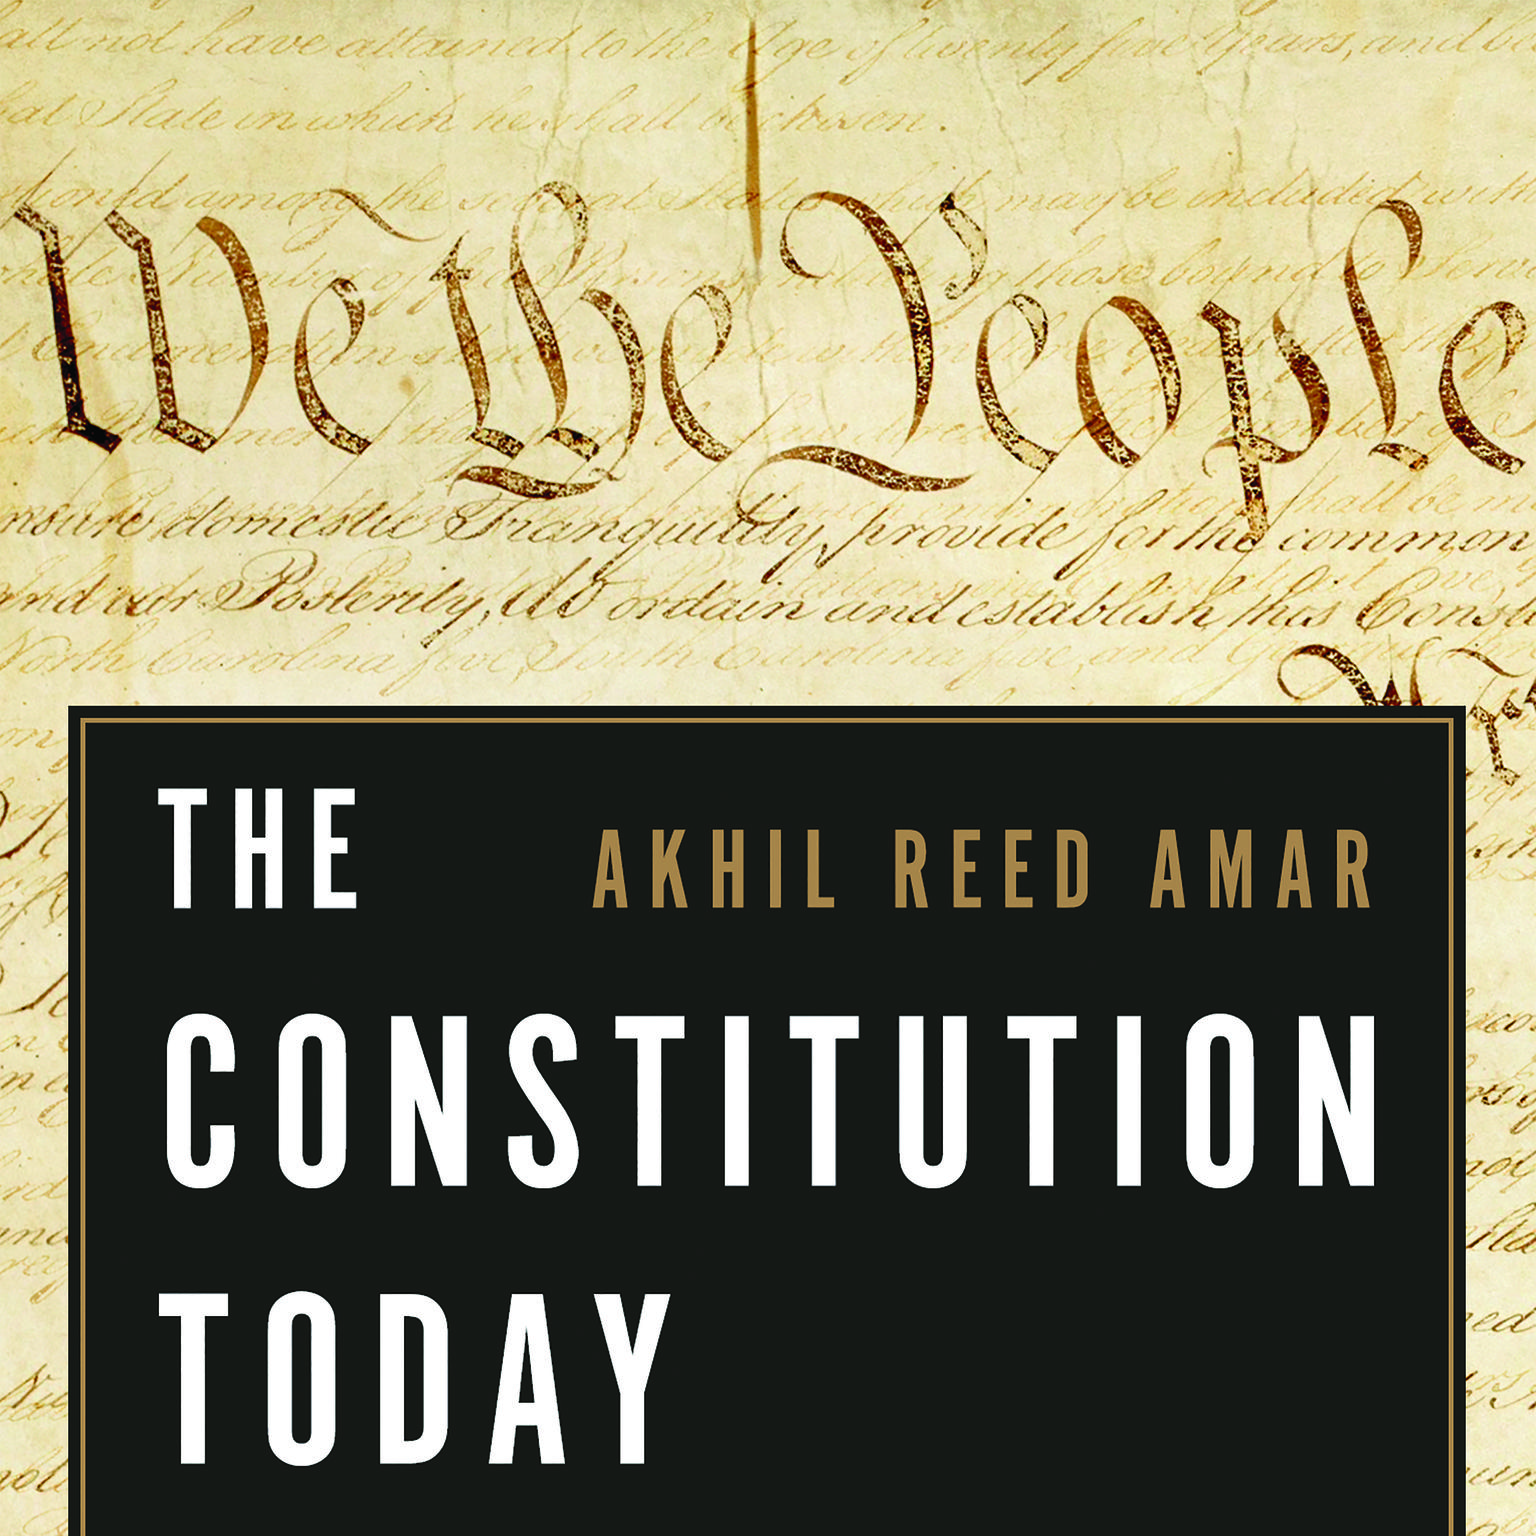 The Constitution Today: Timeless Lessons for the Issues of Our Era Audiobook, by Akhil Reed Amar